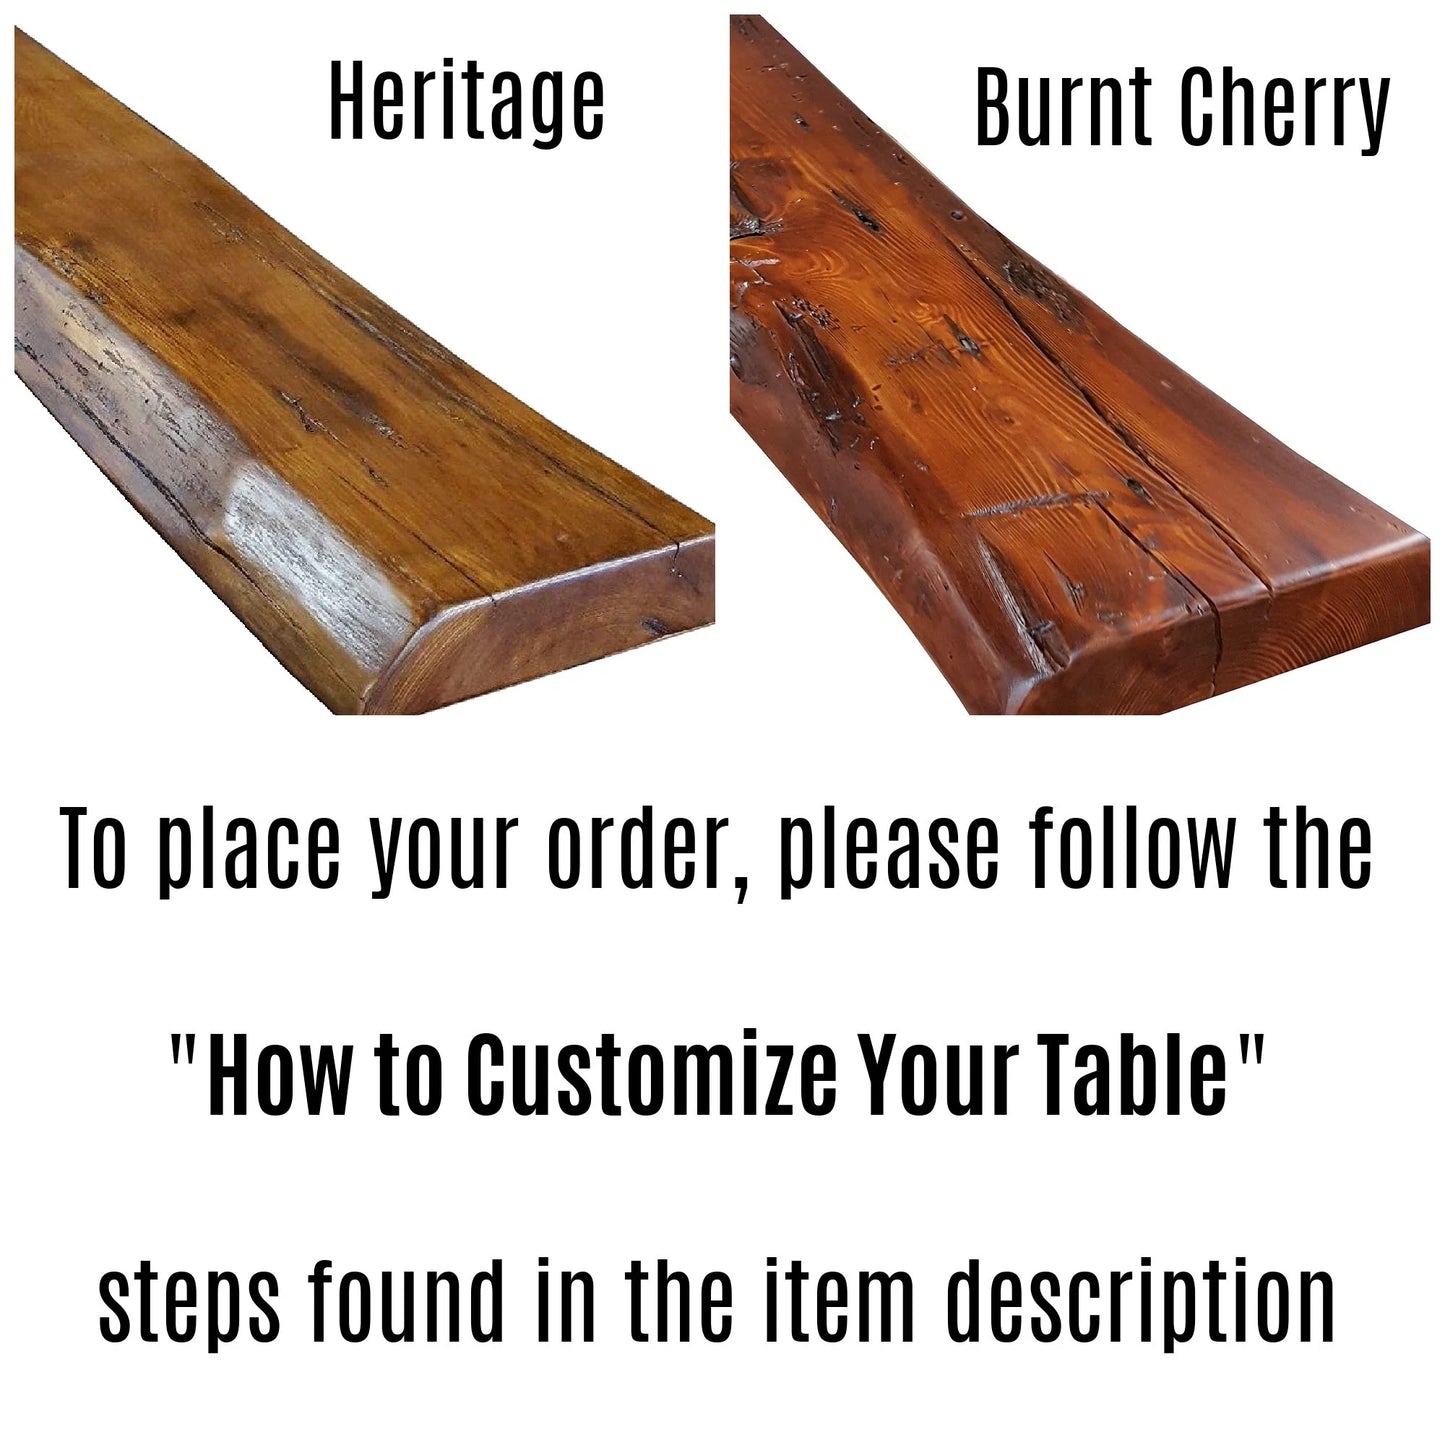 Custom Sale**Shelf tables with Reclaimed wood, Customize your one or two shelf table, many sizes.